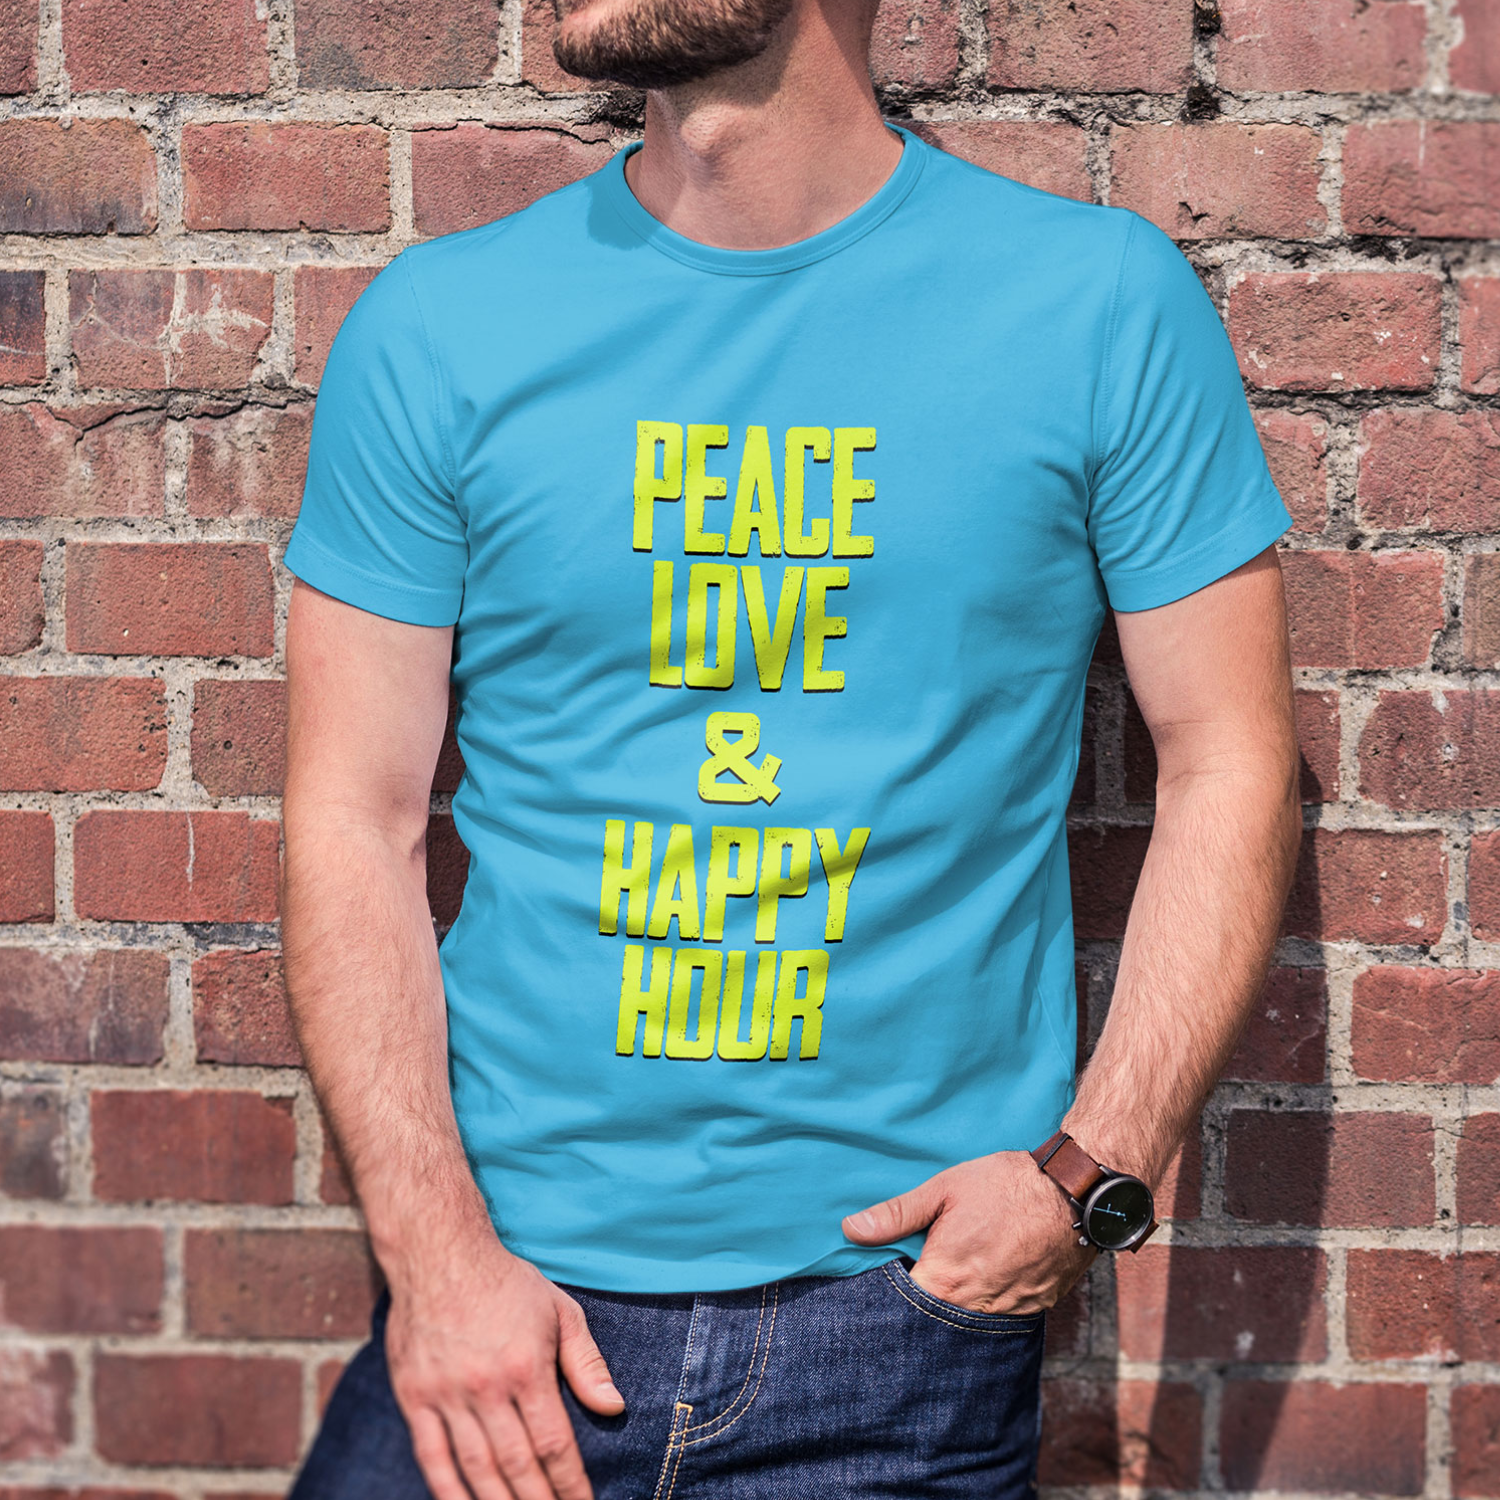 – Happy Peace Hour Good and T-Shirt Love Vibes